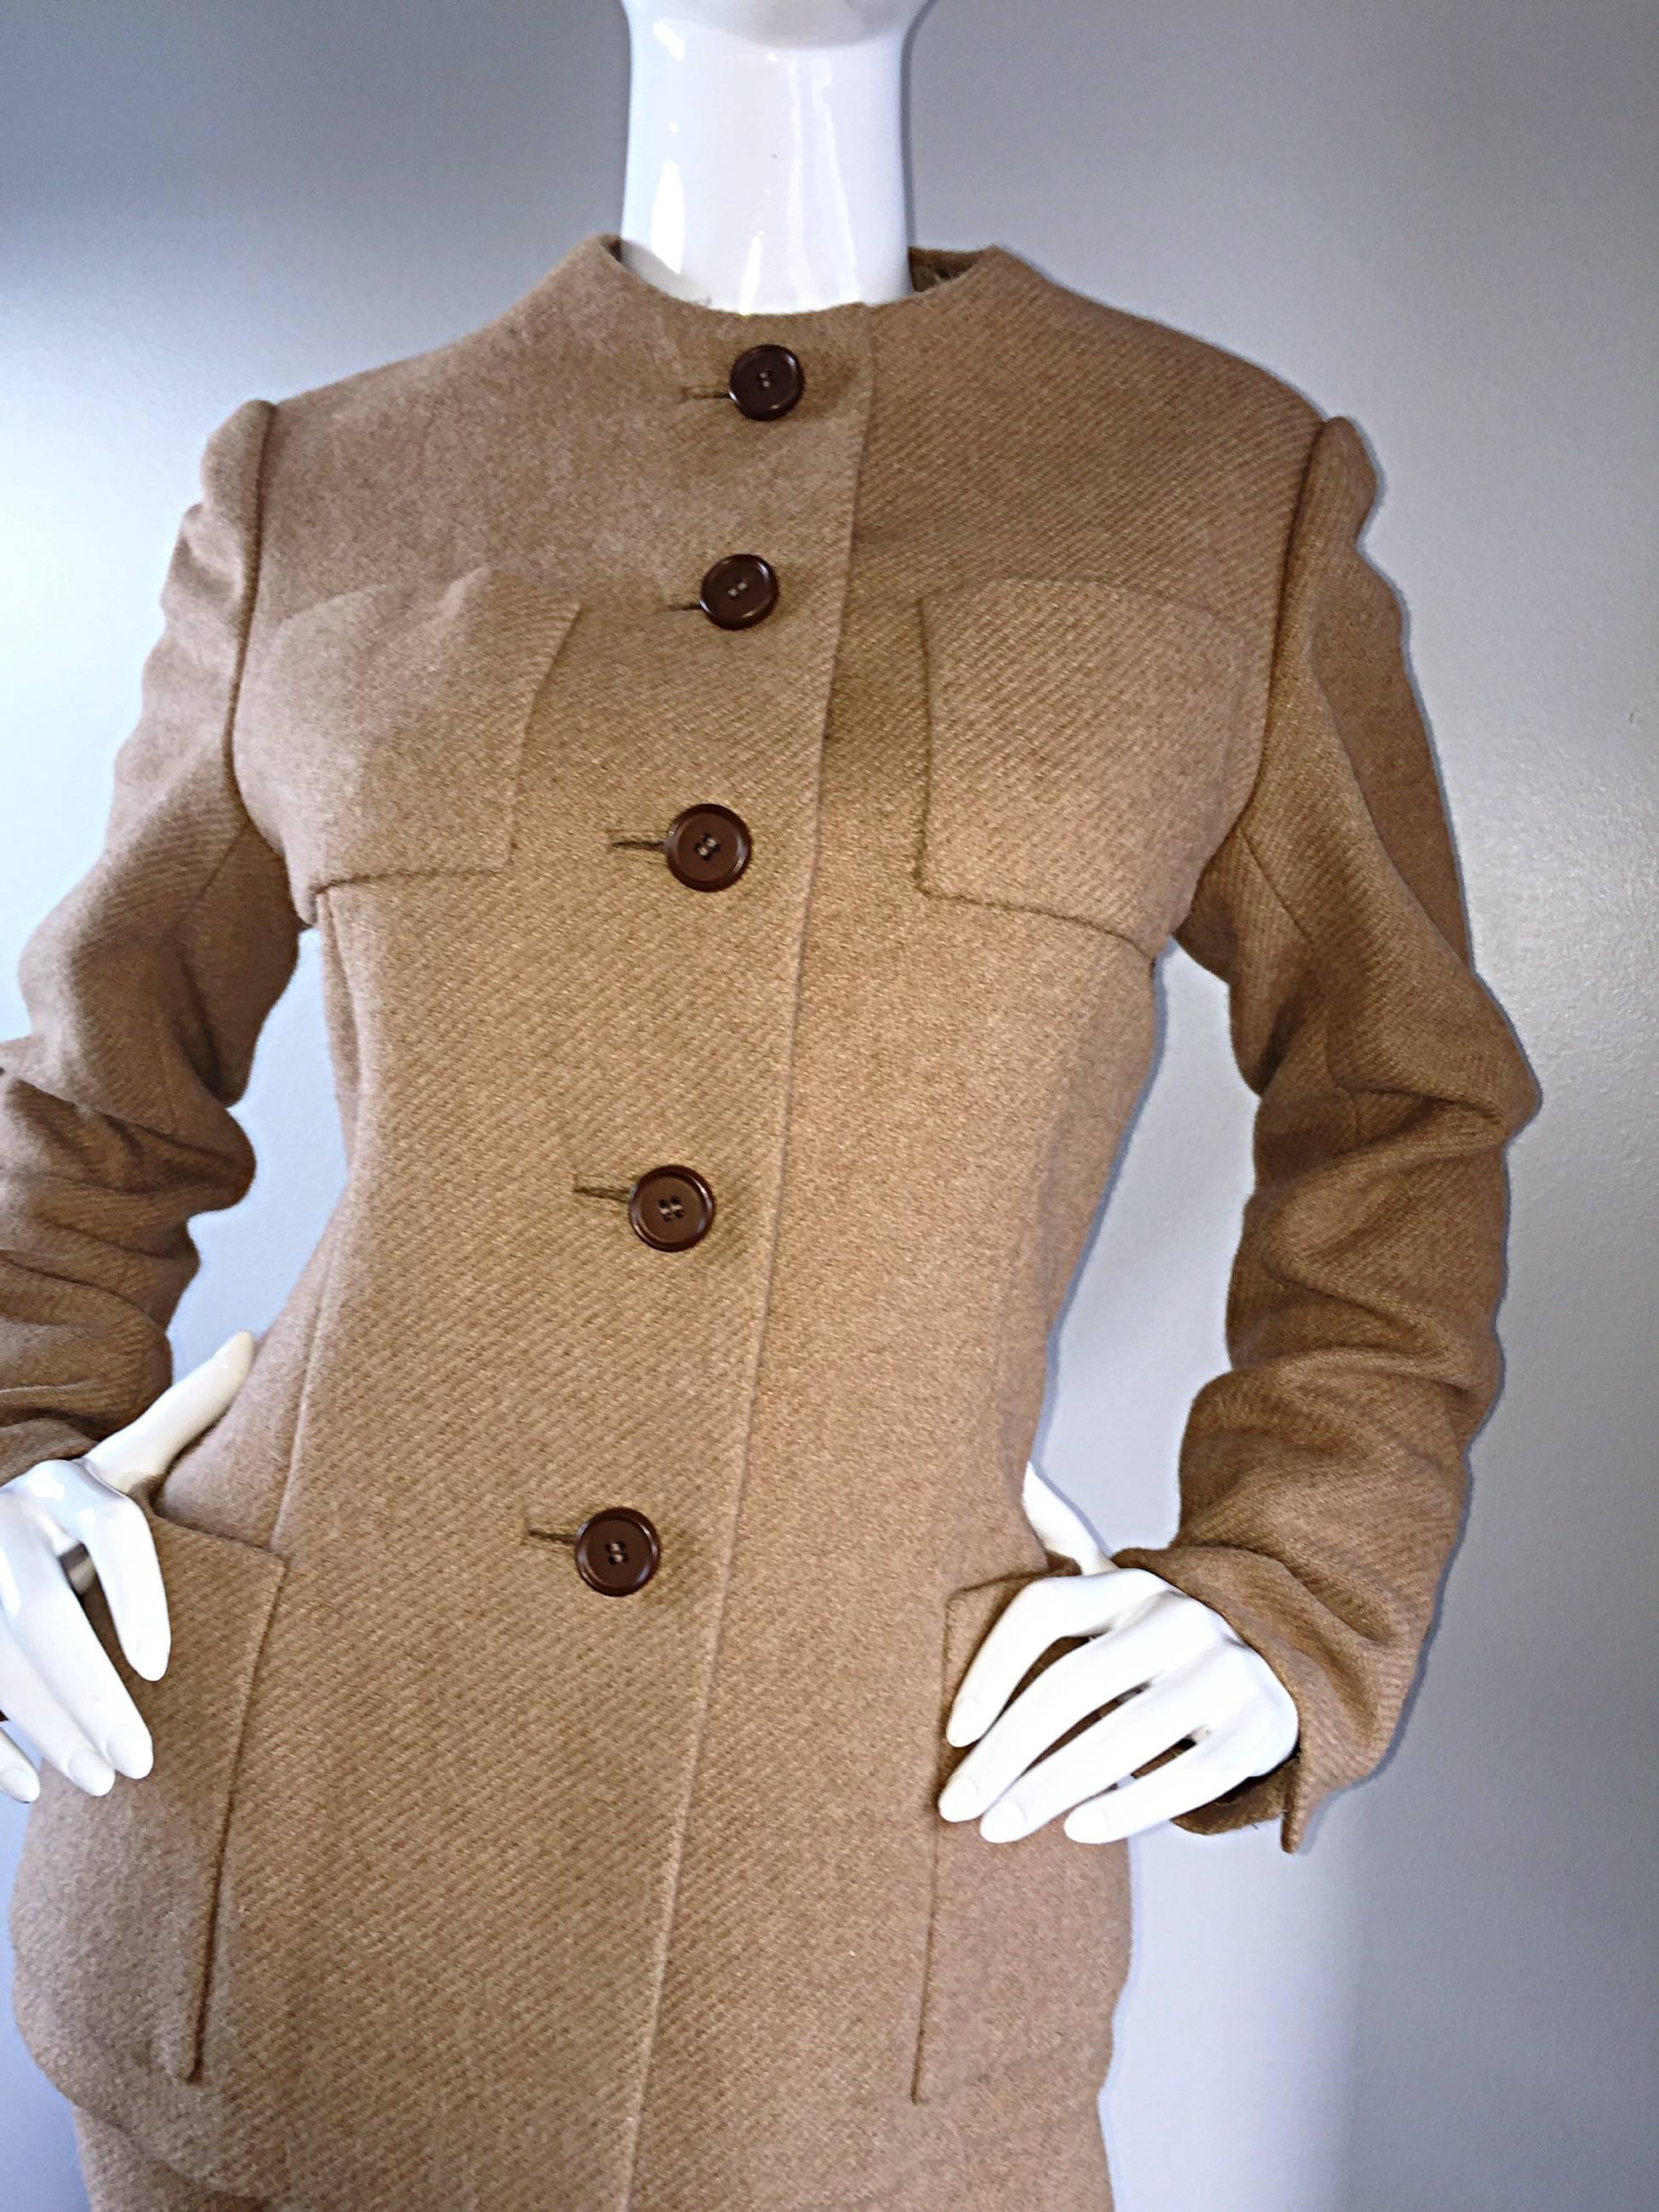  Norman Norell 1960s Size 12 Tan / Camel 60s Vintage Blazer Jacket + Skirt Suit In Excellent Condition For Sale In San Diego, CA